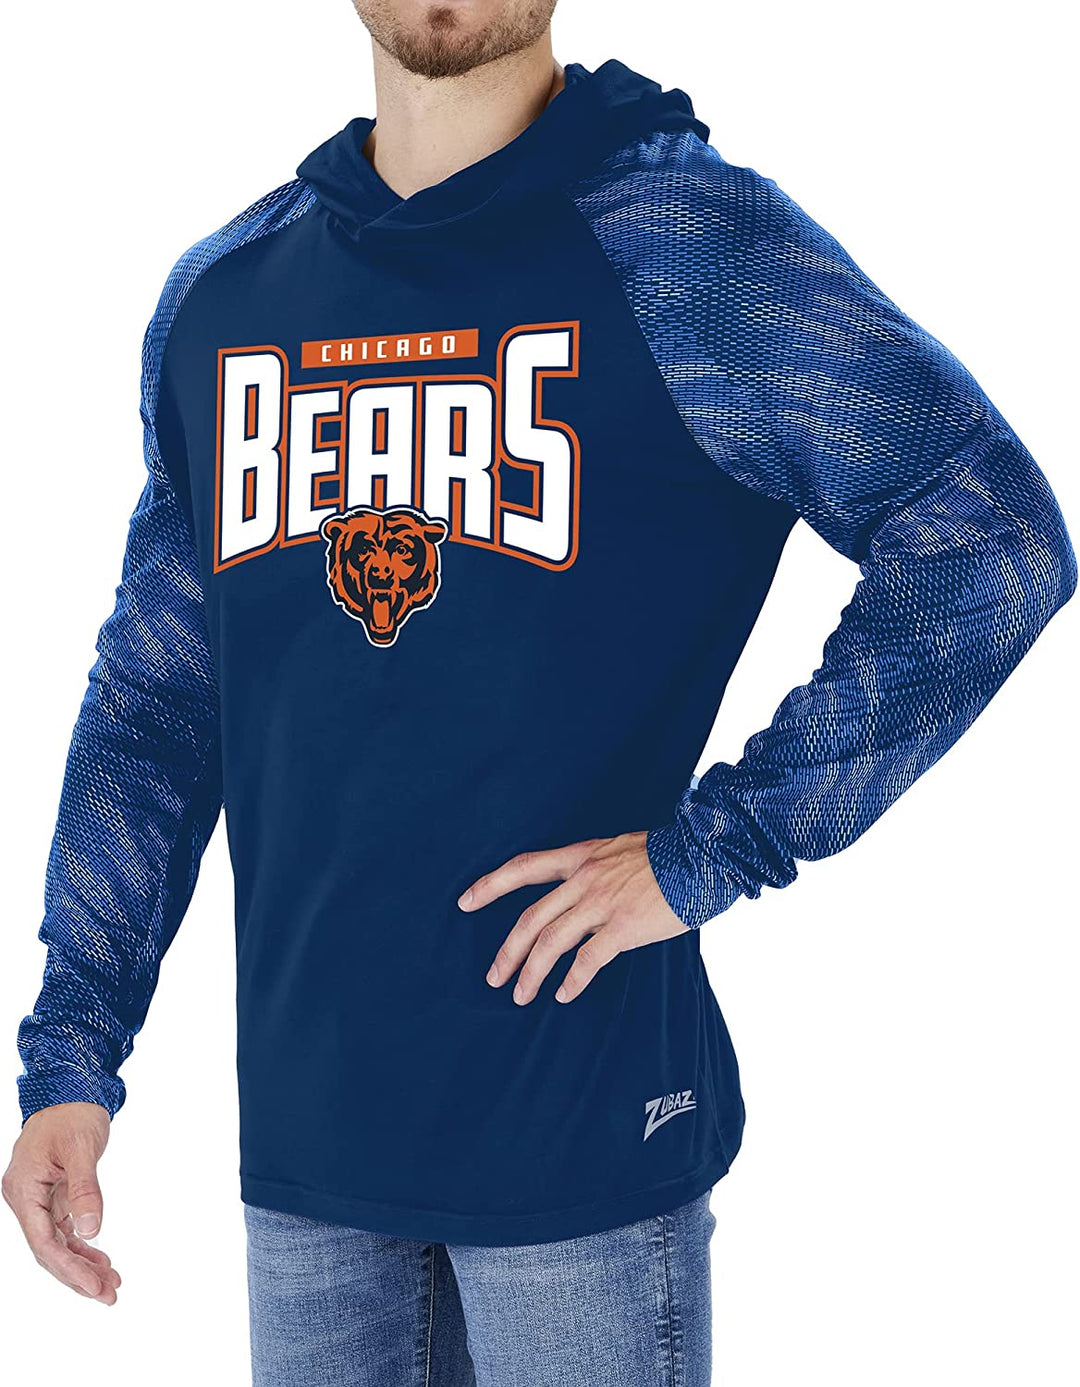 Zubaz Chicago Bears NFL Men's Team Color Hoodie with Tonal Viper Sleeves